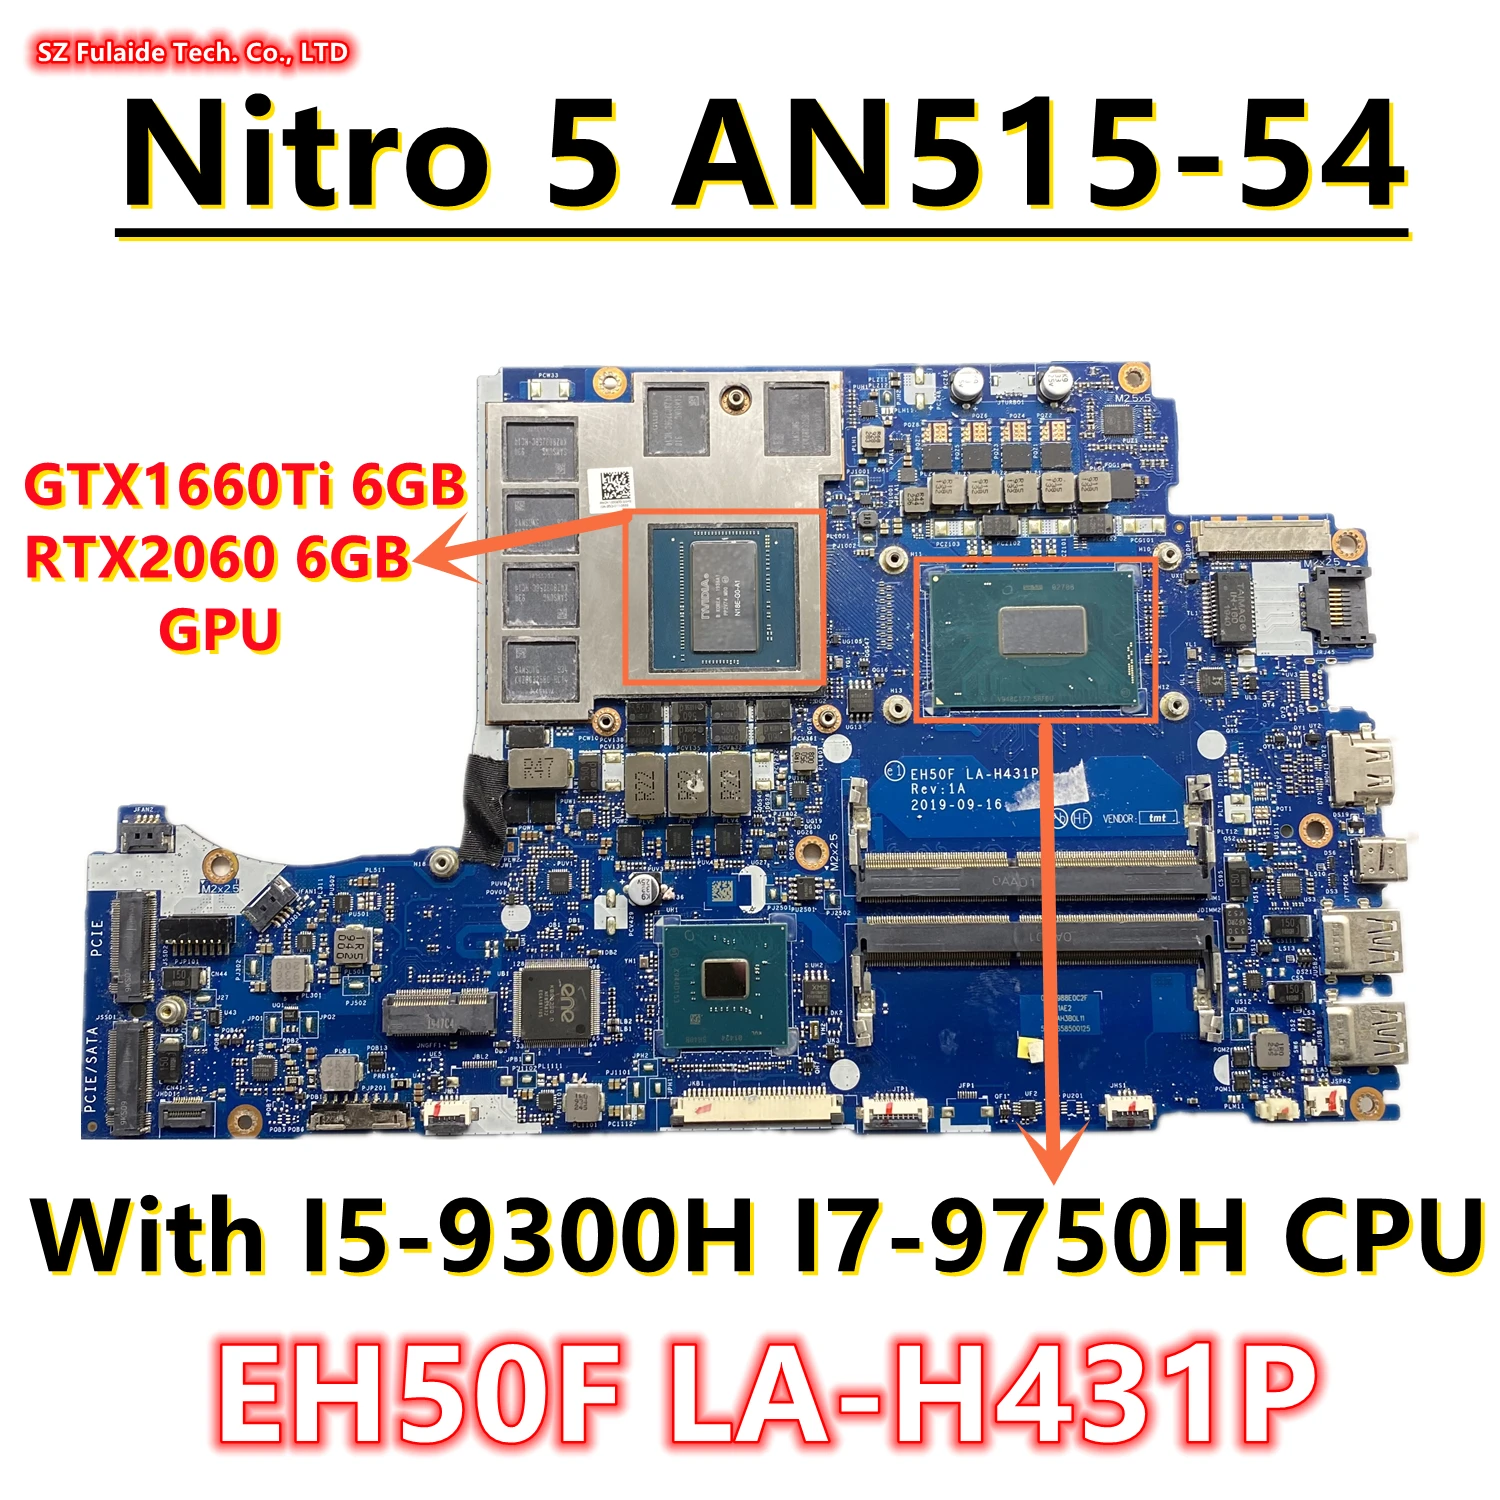 

EH50F LA-H431P For Acer Nitro 5 AN515-54 Laptop Motherboard With I5-9300H I7-9750H CPU GTX1660Ti 6GB RTX2060 6GB GPU 100% Work